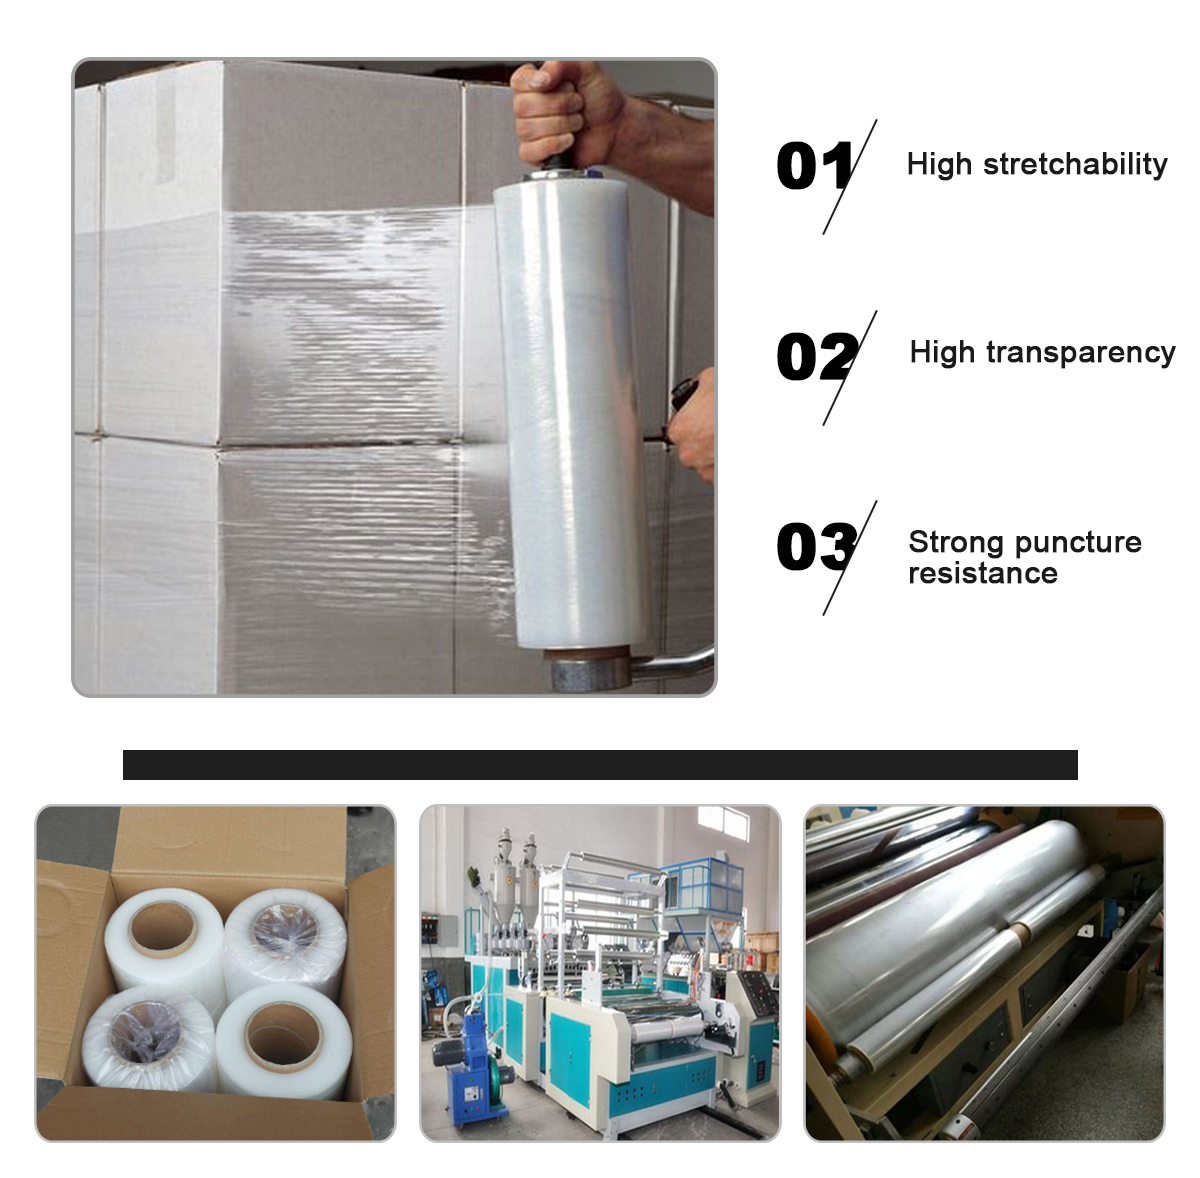 High stretchability can be customized pallet wrapping film